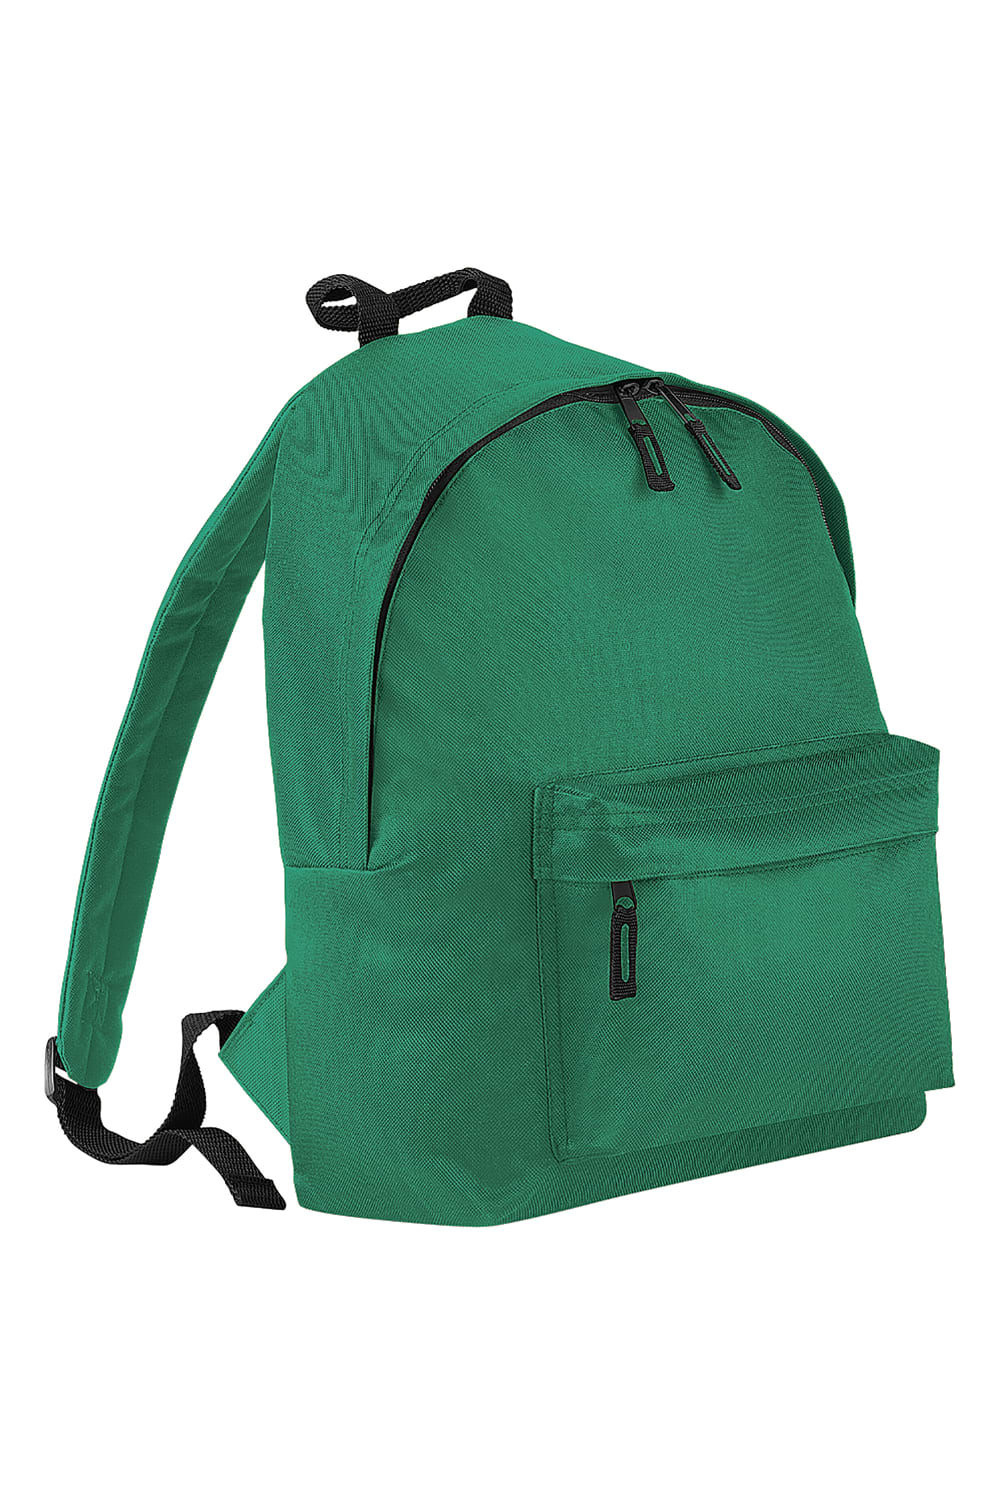 Fashion Backpack / Rucksack (18 Liters) (Pack of 2) (Kelly Green)